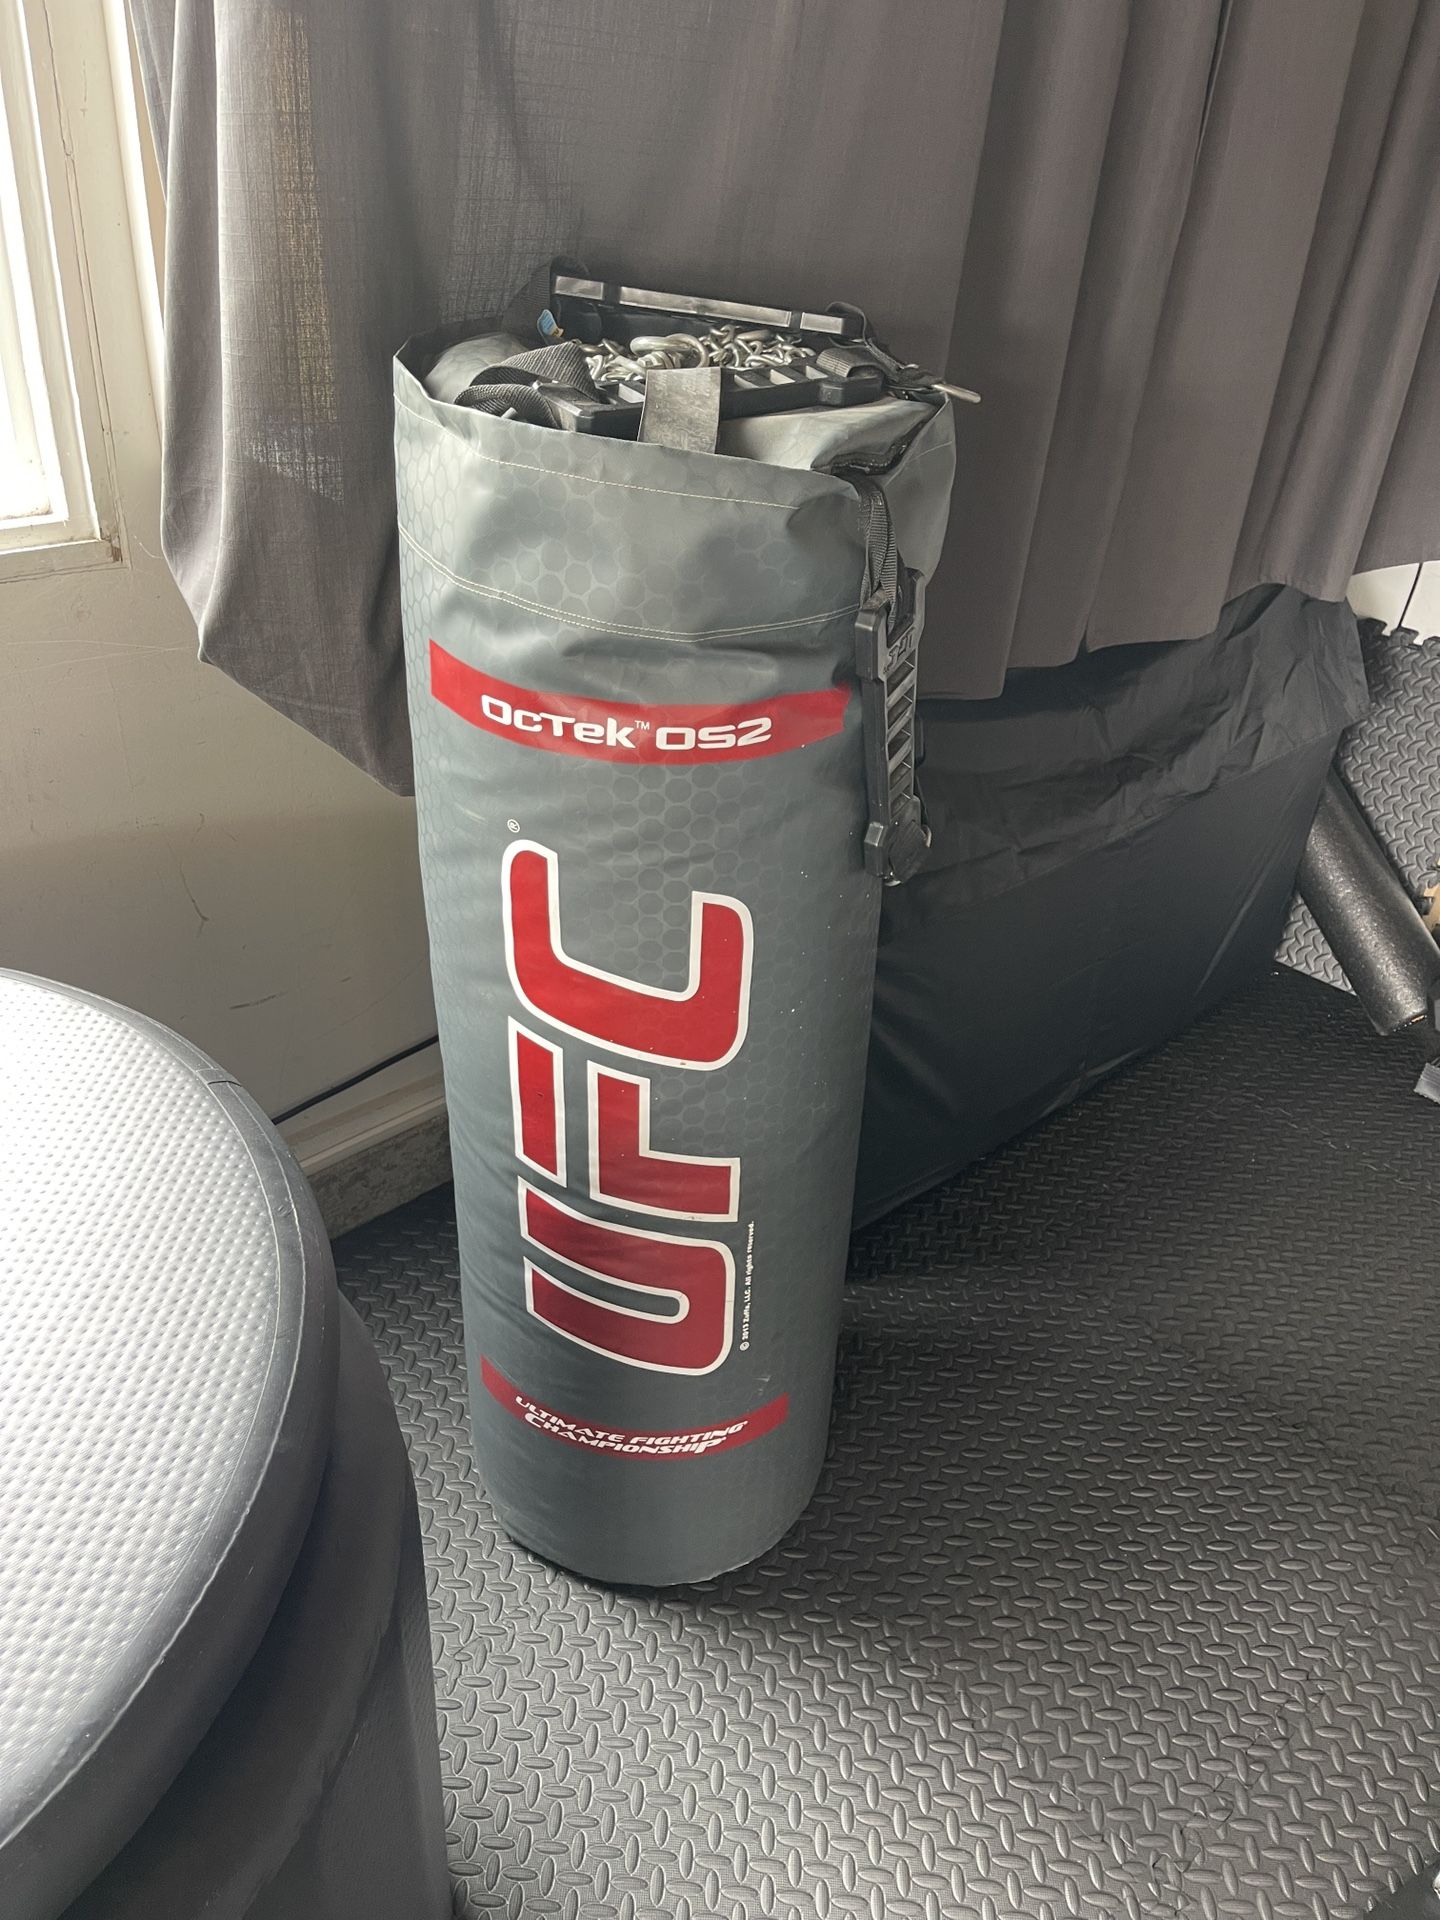 UFC Punching Bag Pads And Gloves